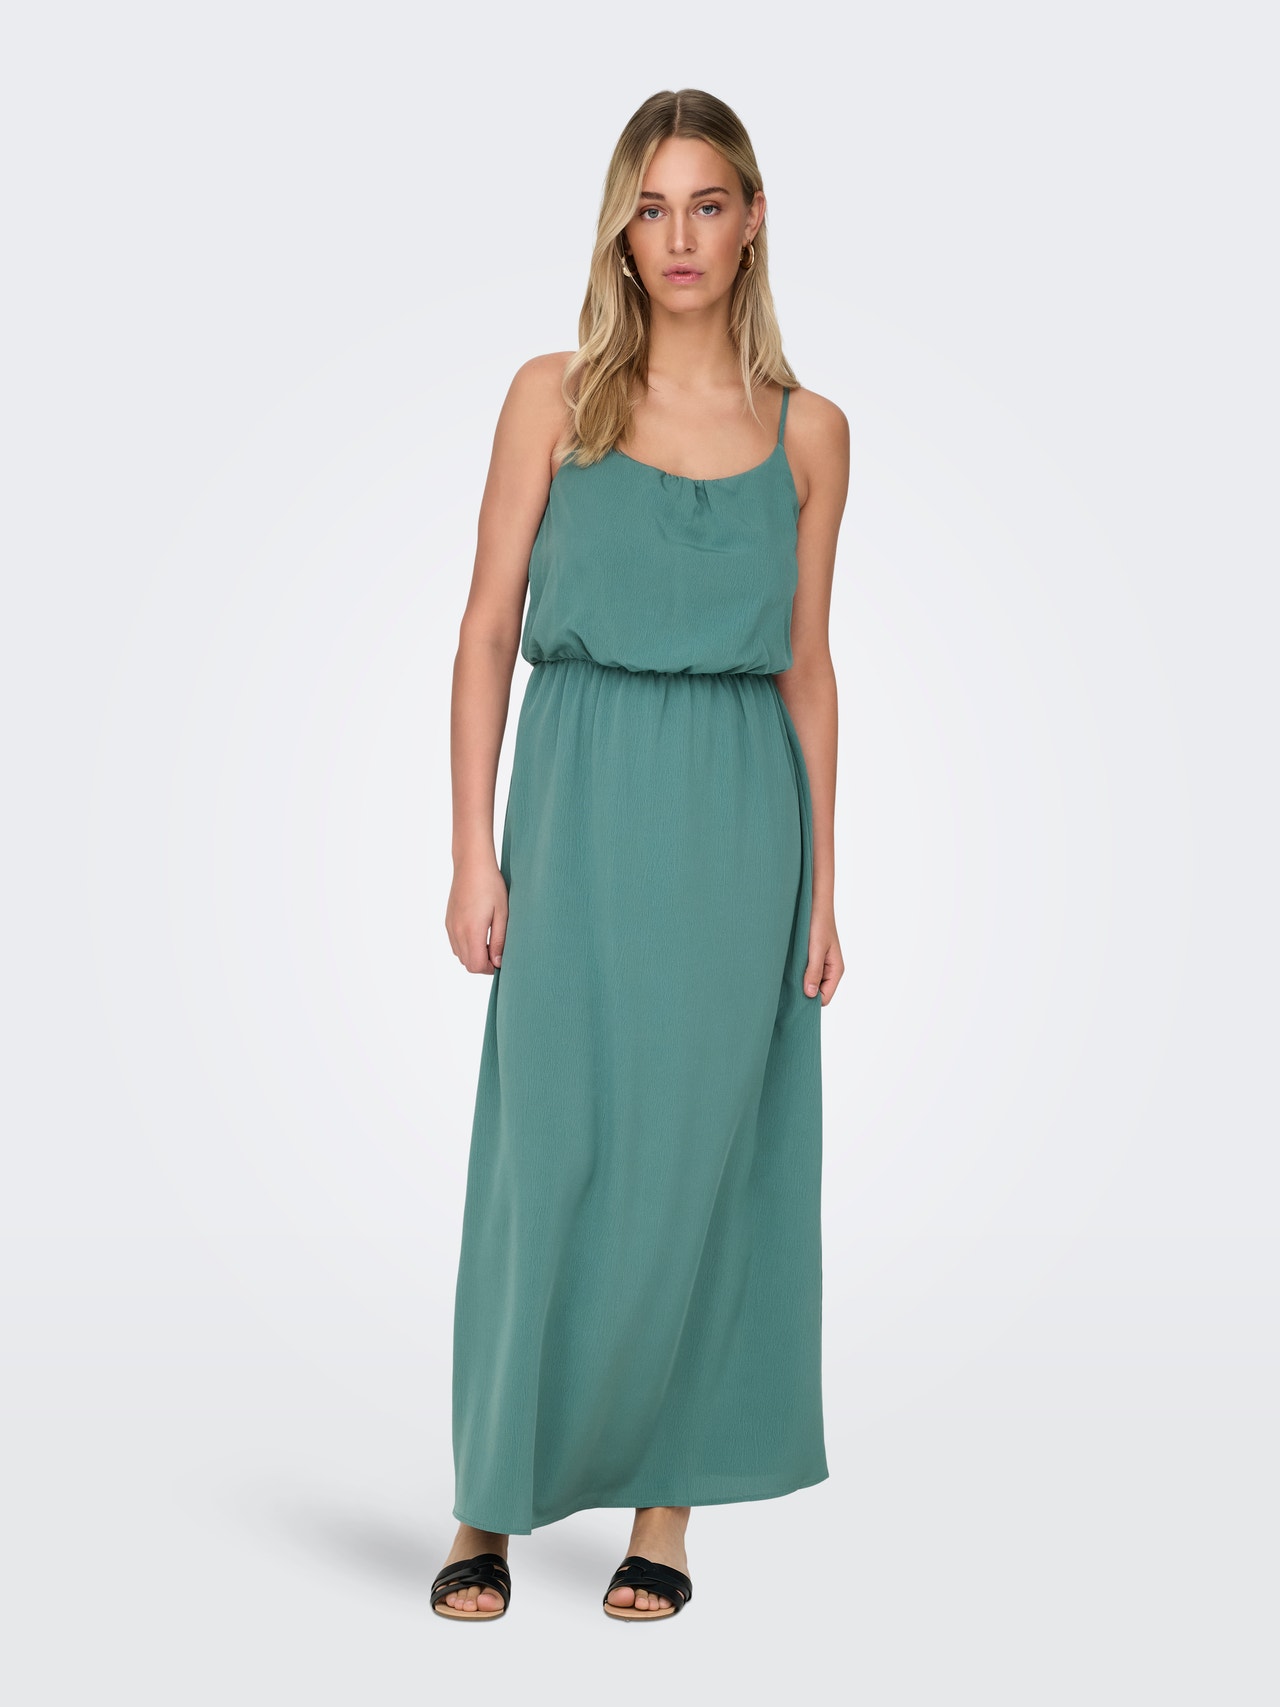 ONLY Midi dress with shoulder straps -Blue Spruce - 15335556